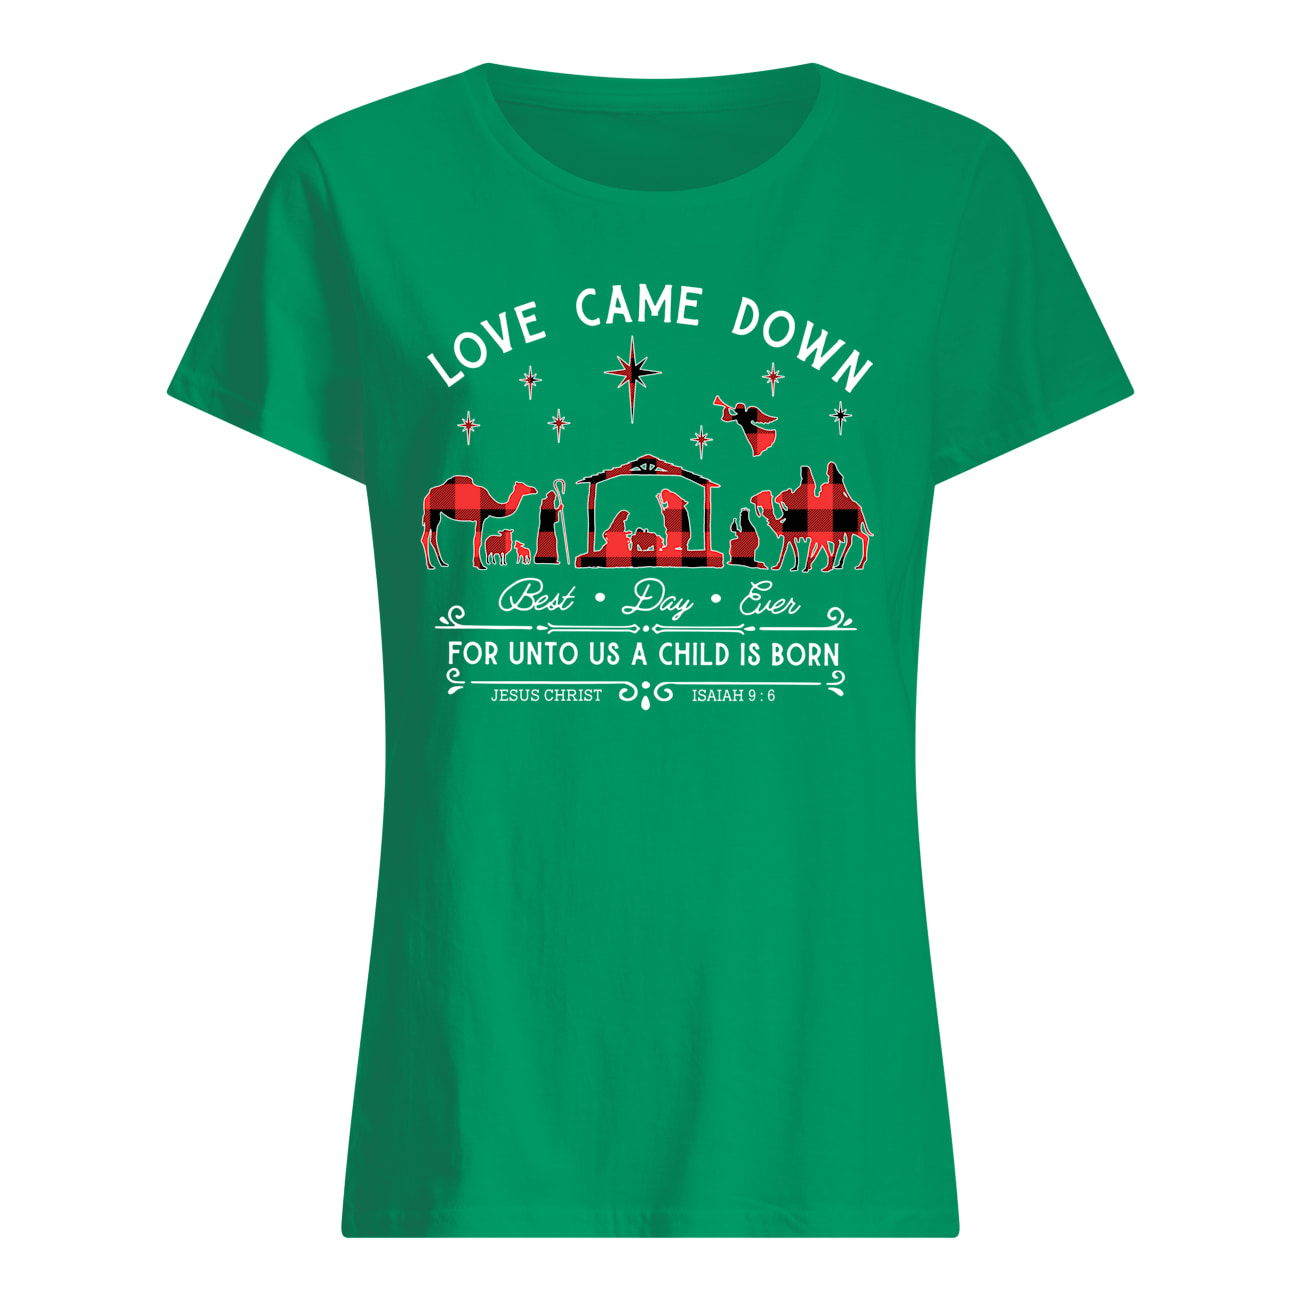 Love came down best day ever for unto us a child is born womens shirt